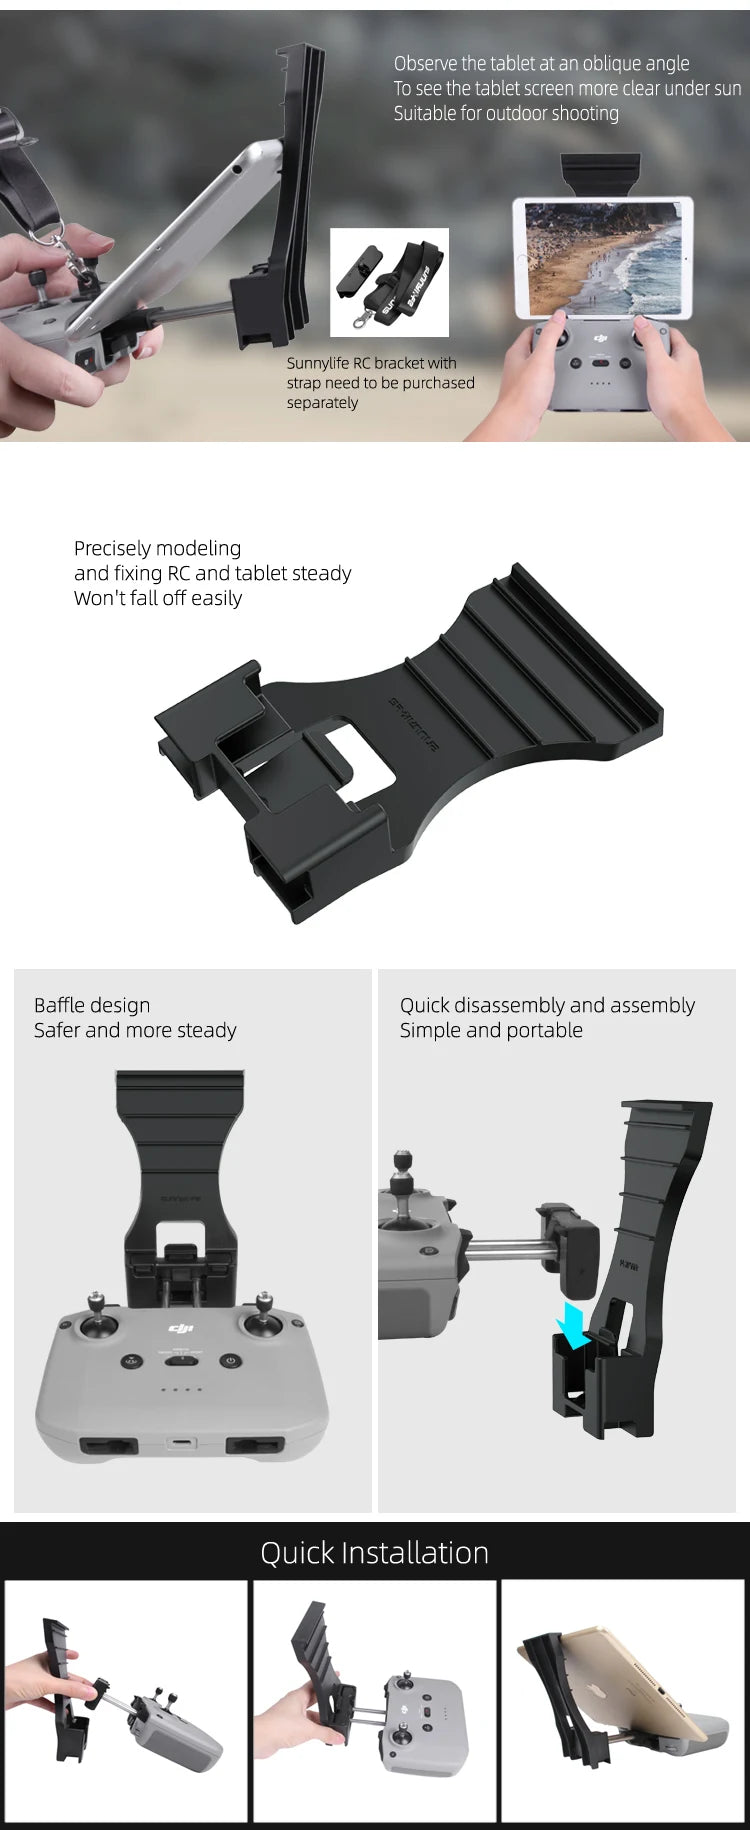 Suitable for outdoor shooting Sunnylife RC bracket with strap need to be purchased separately Preci